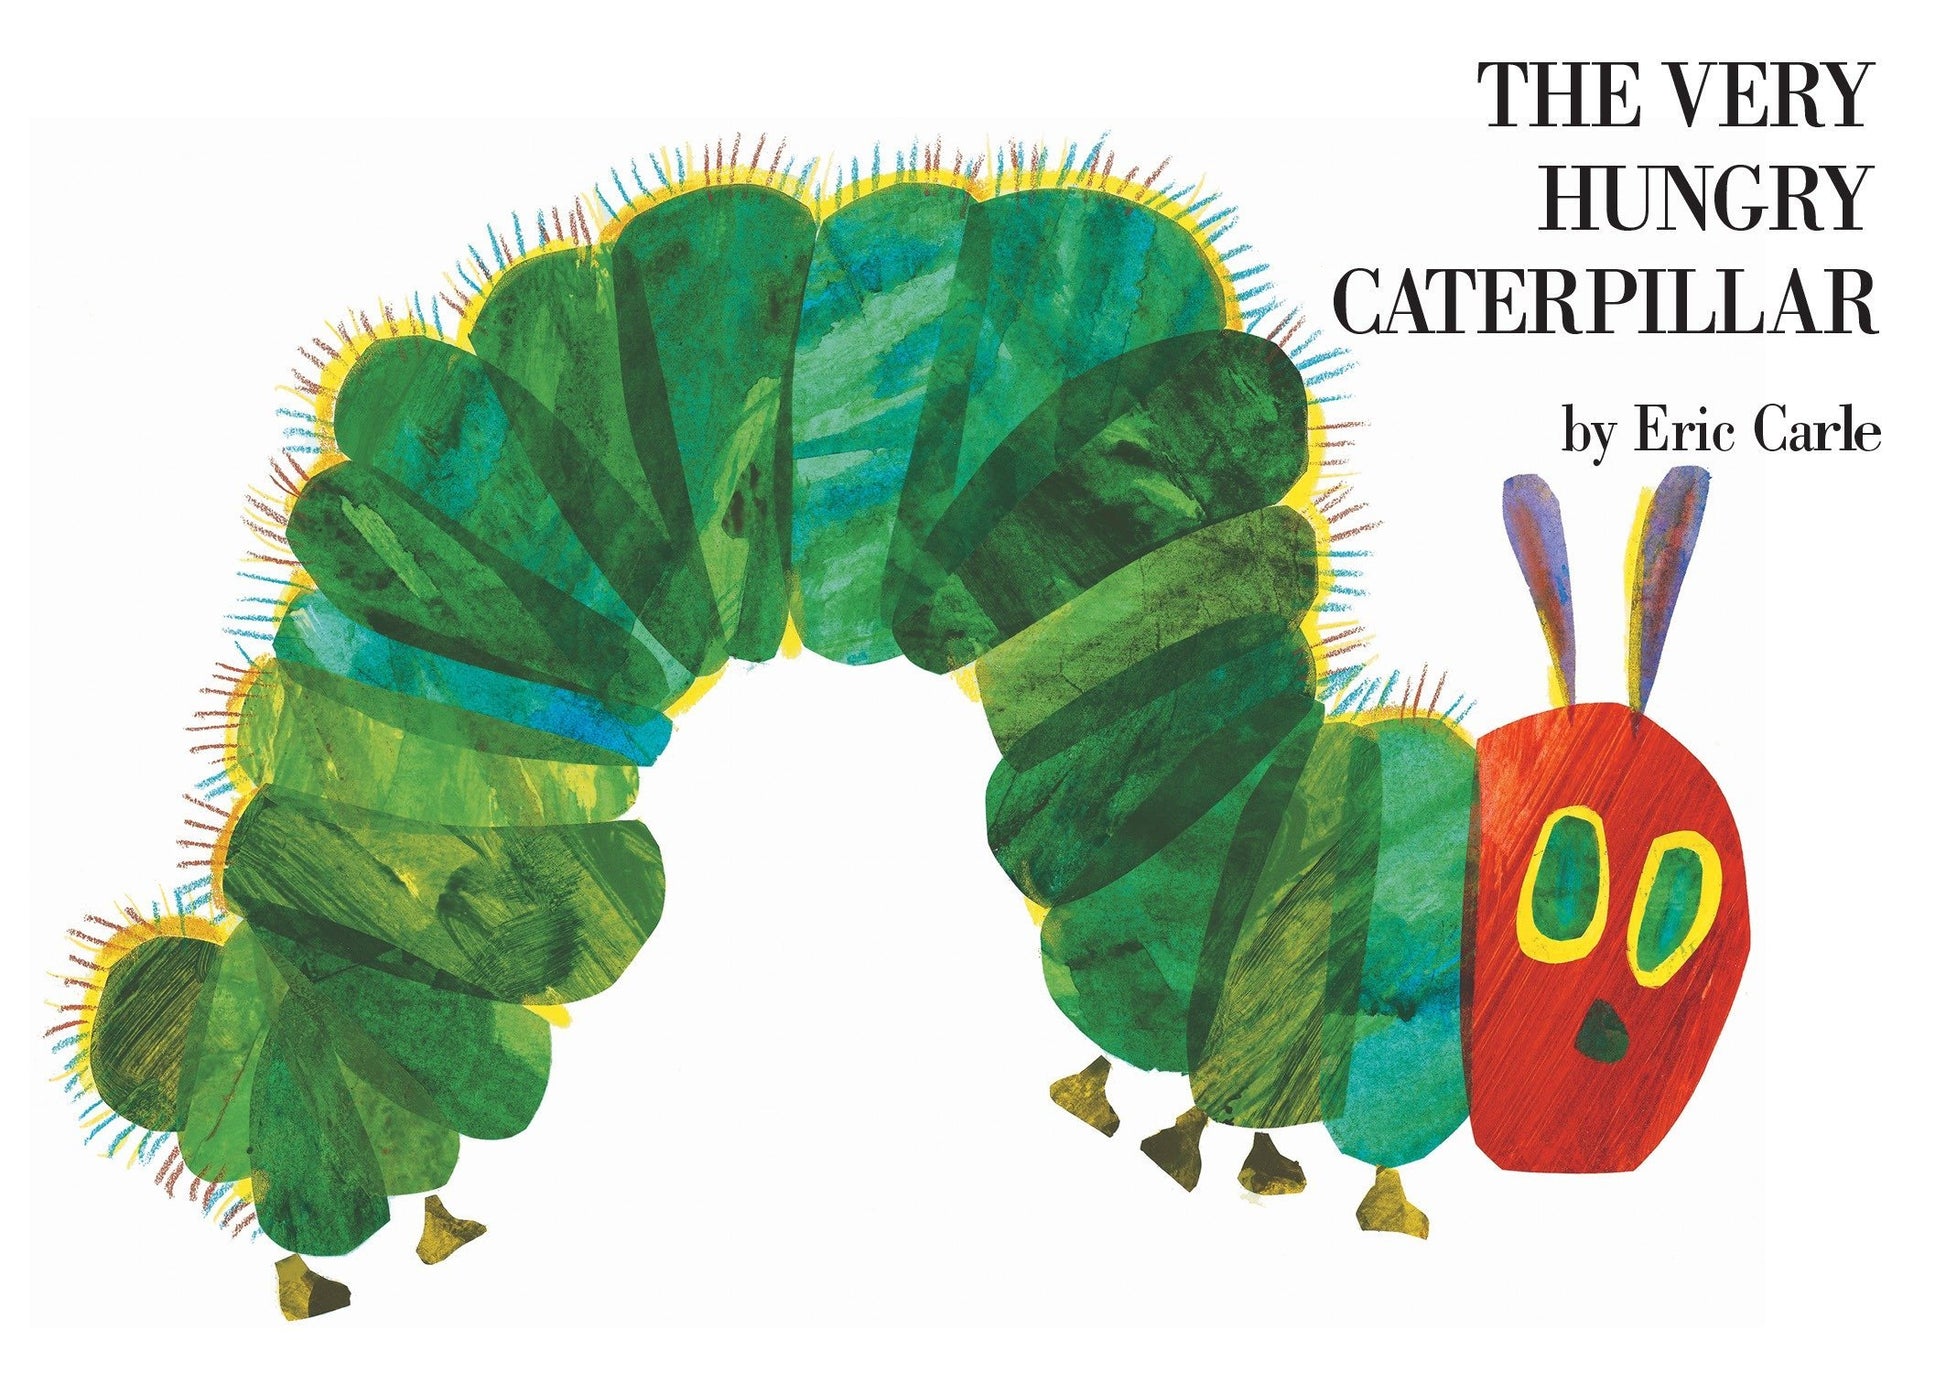 cover of book has a green caterpillar, title, and authors name